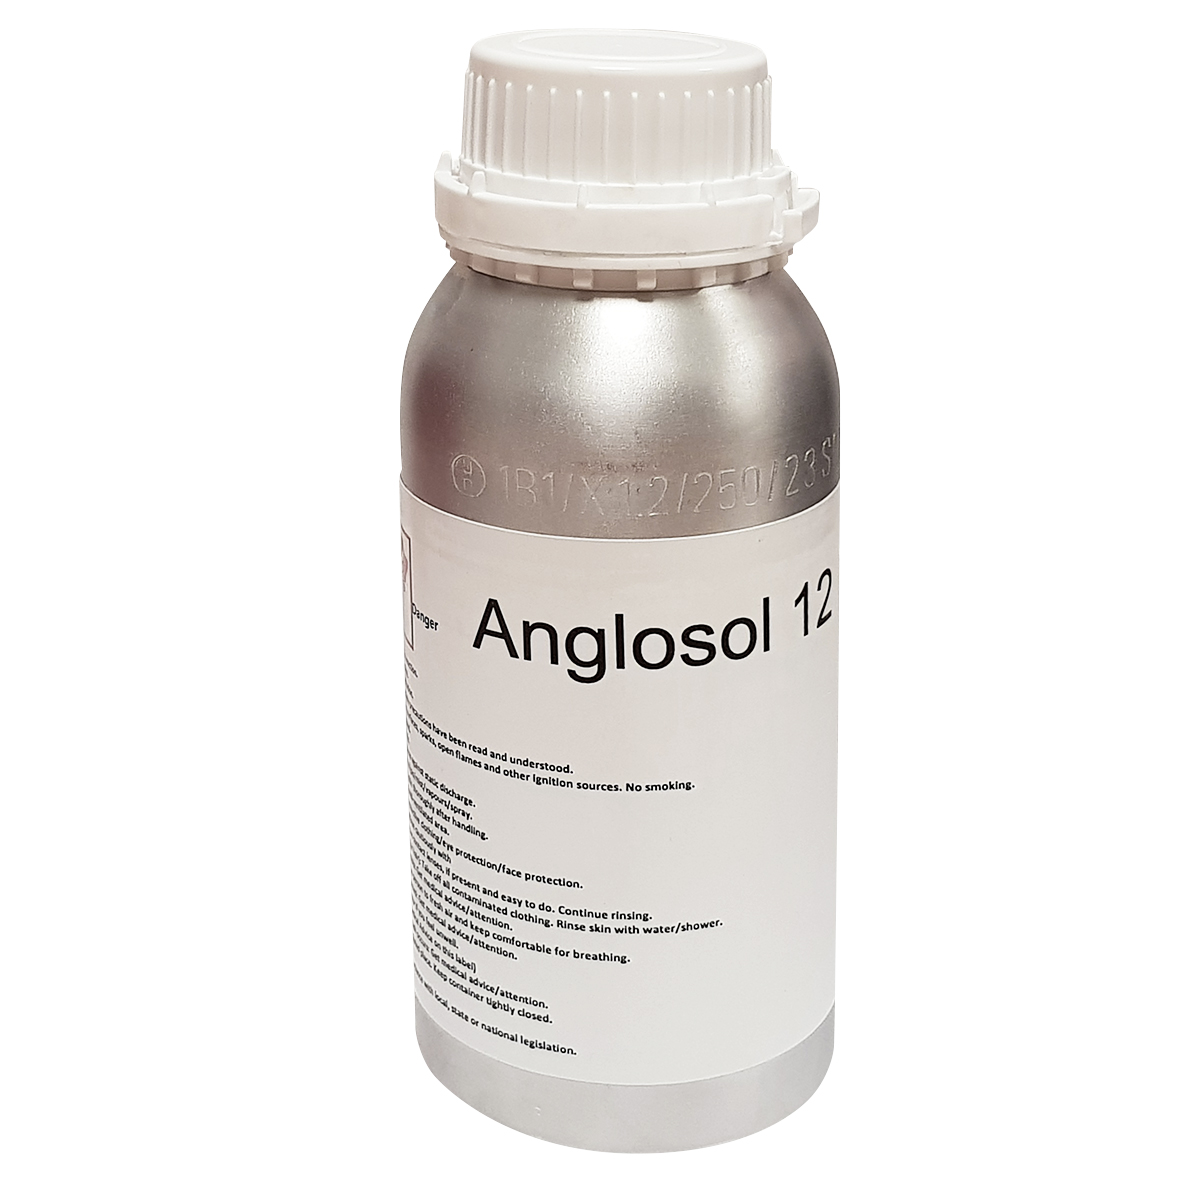 Anglosol 1200 (Tensol 12 Equivalent)